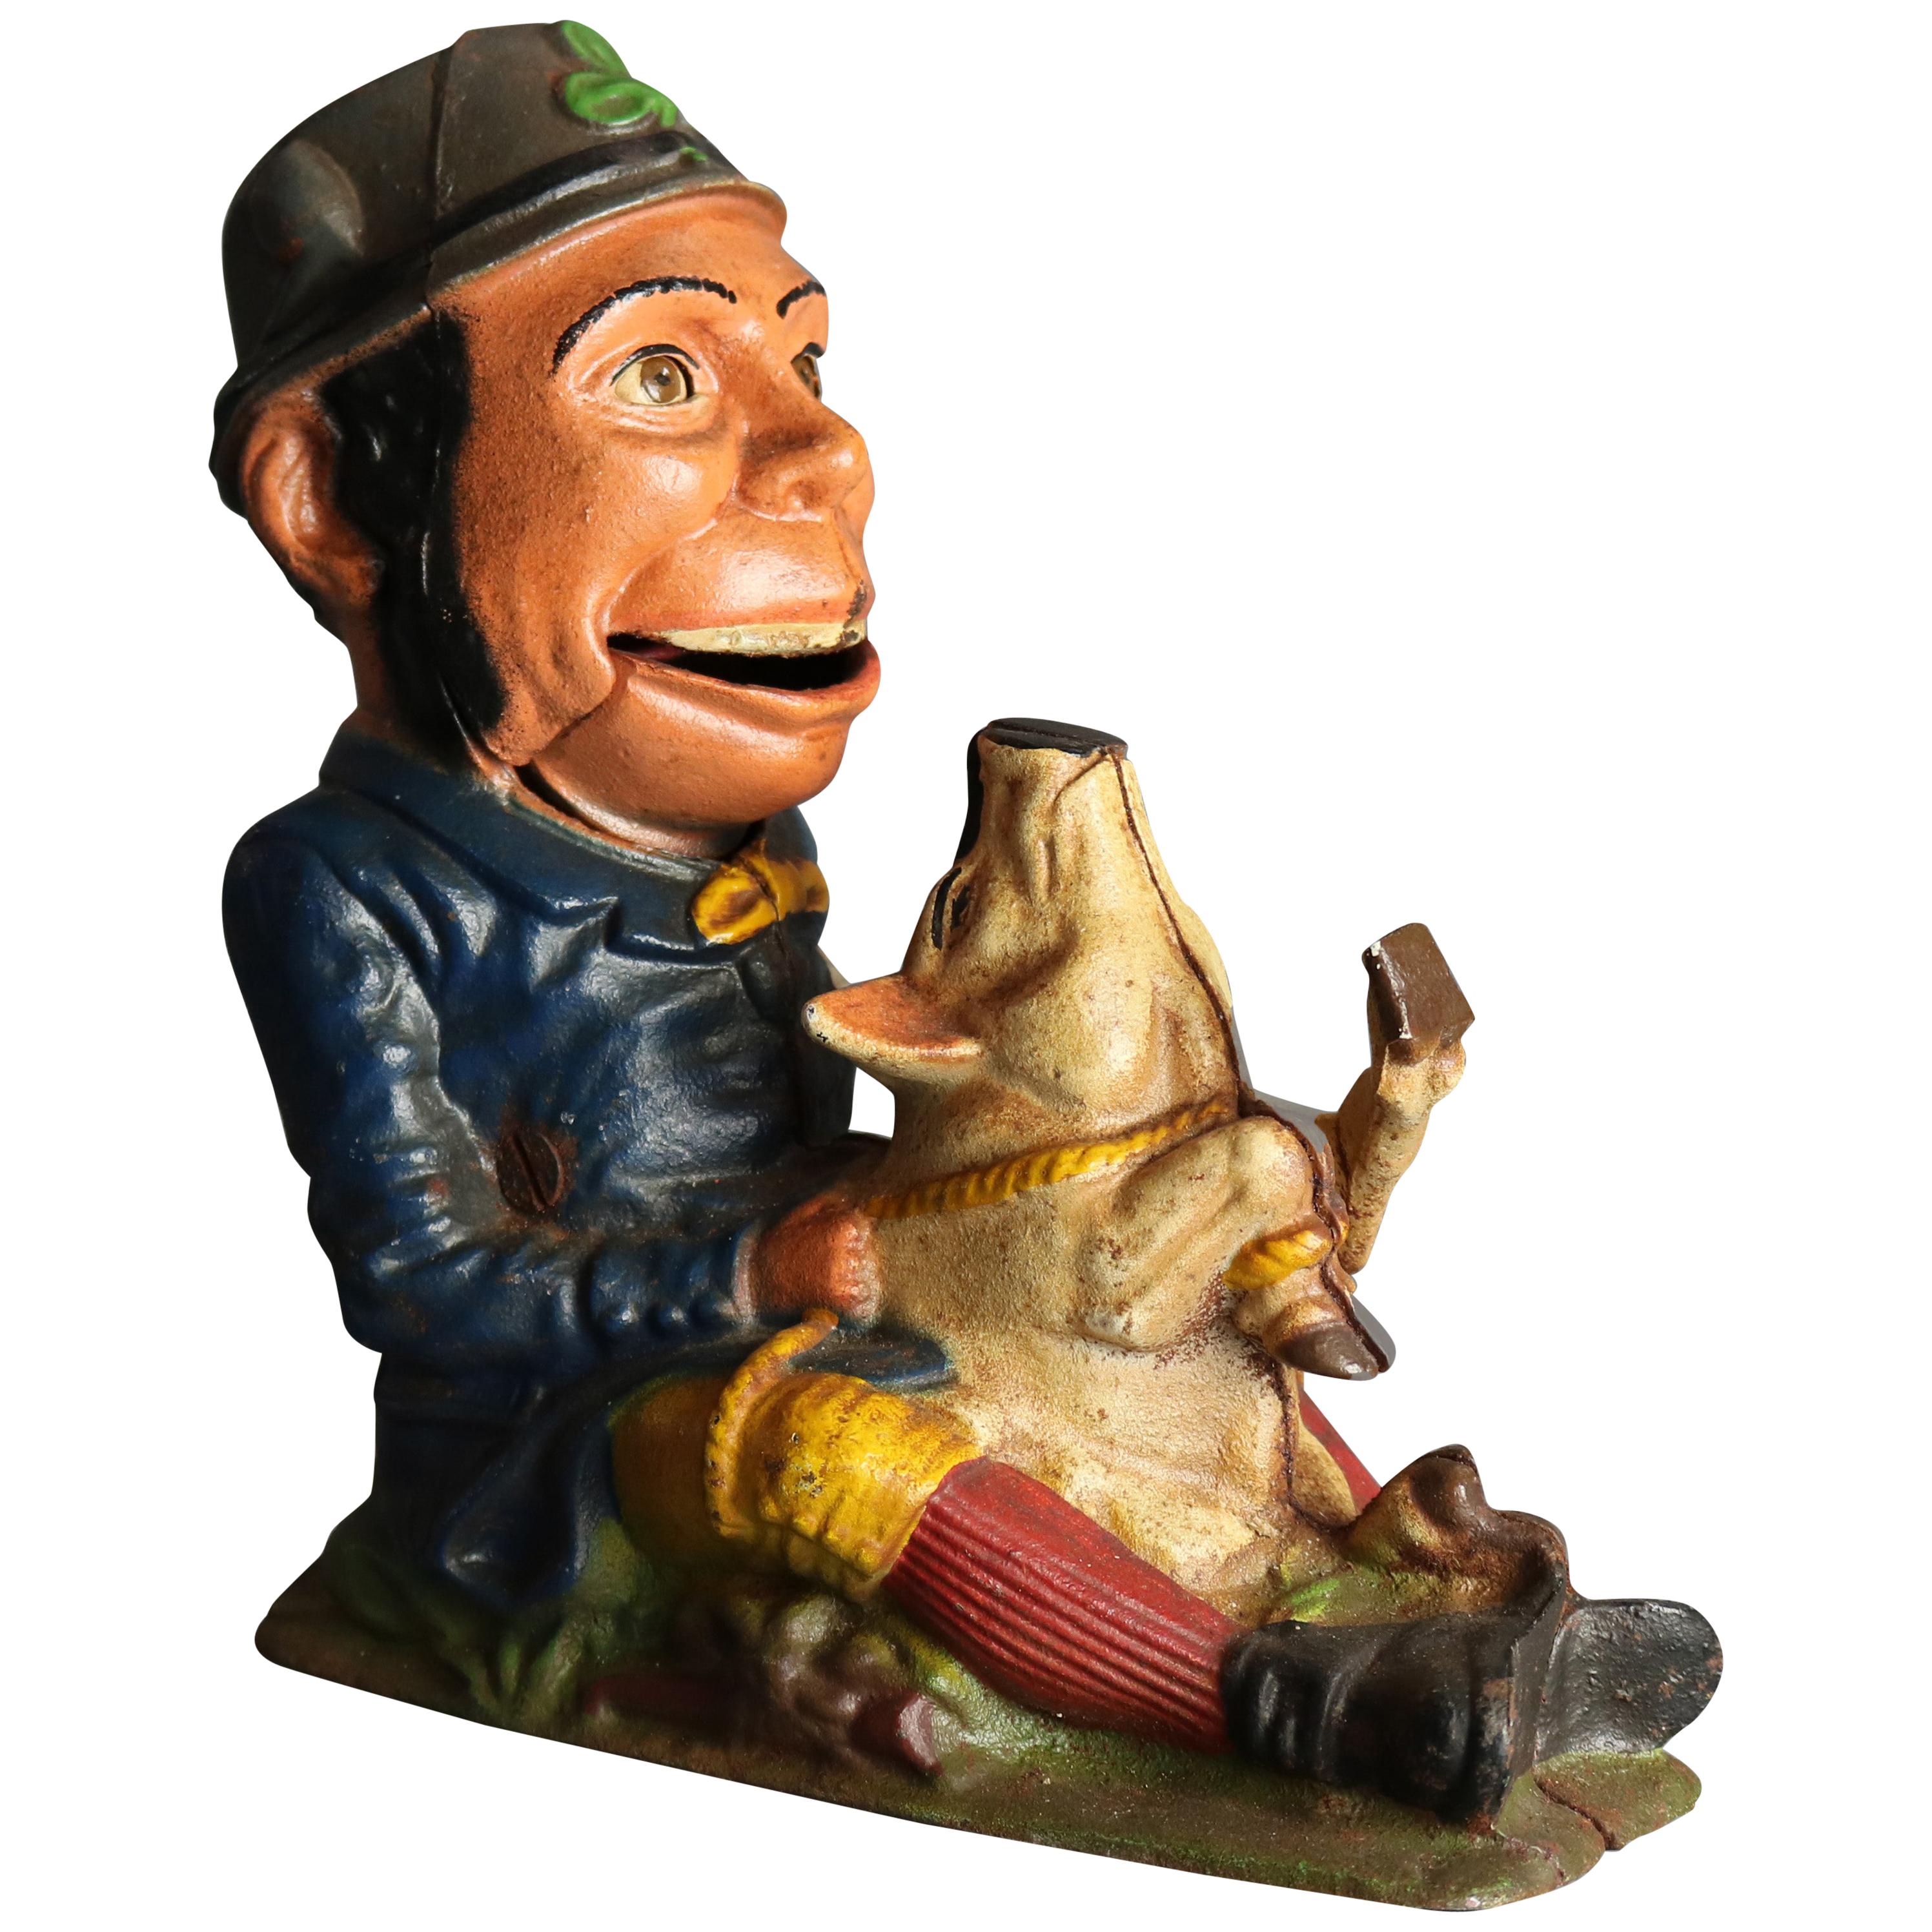 Vintage Book of Knowledge Cast Iron Mechanical Bank, Patty and the Pig